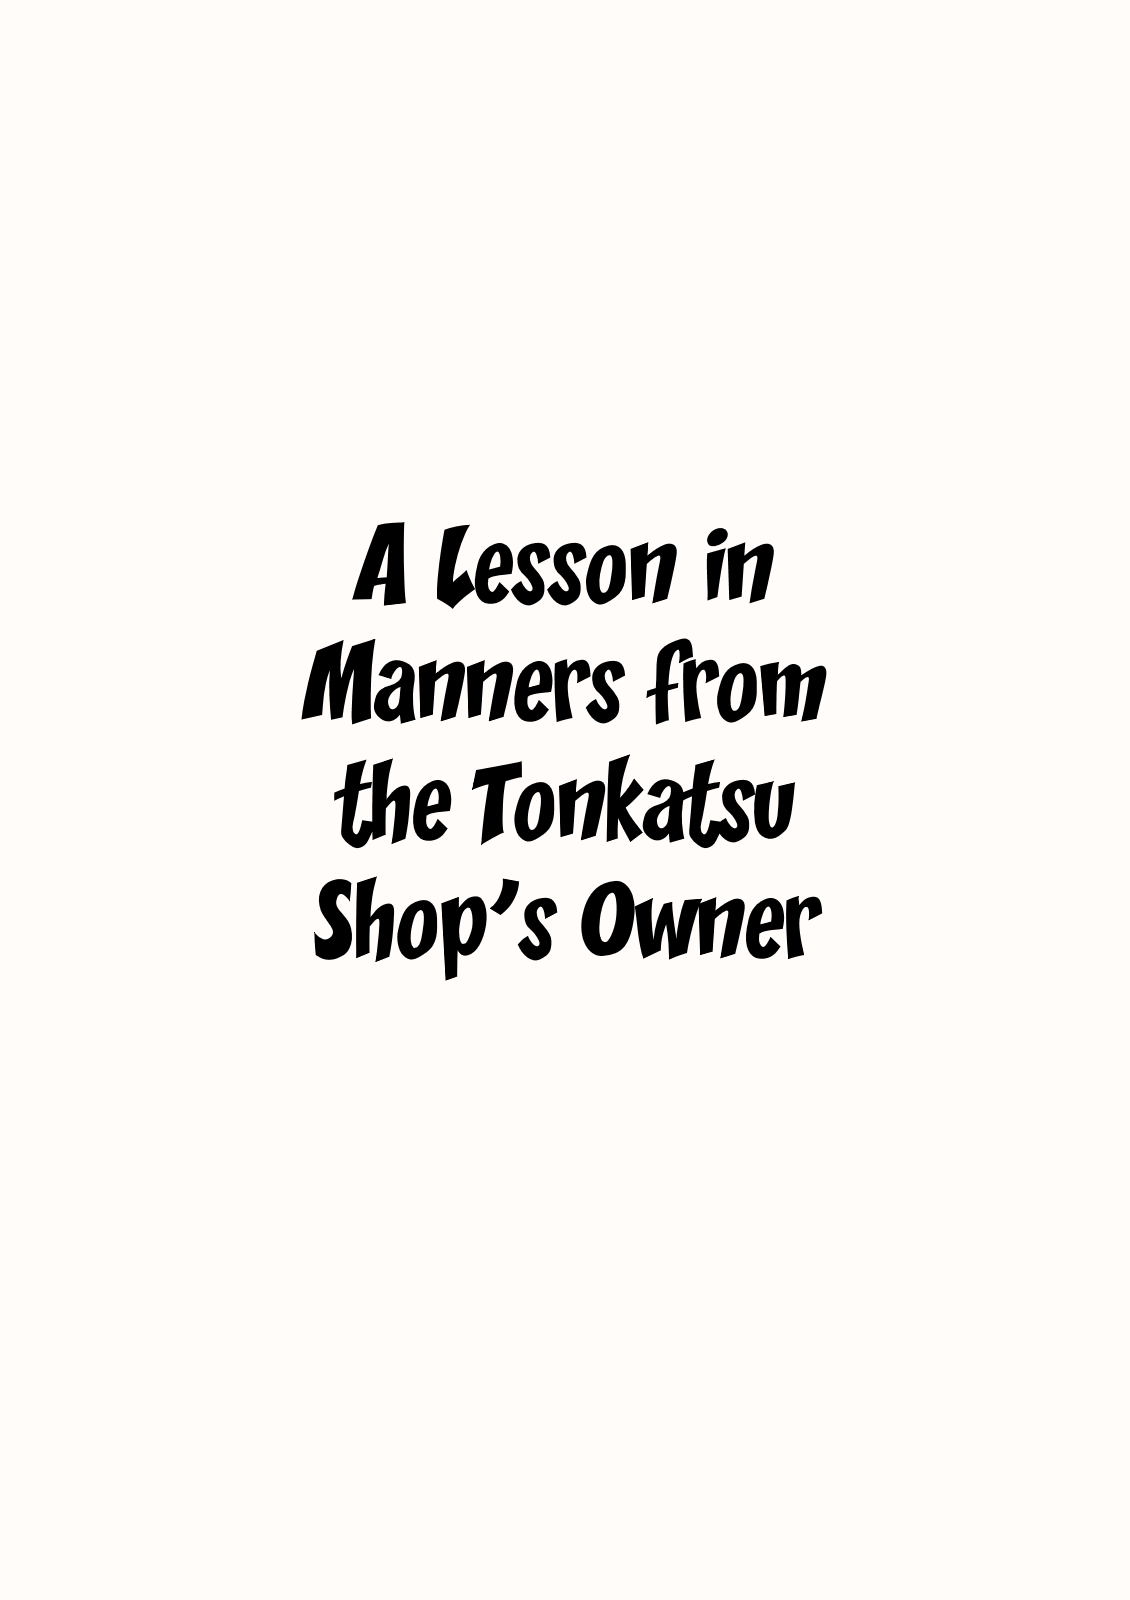 Oshimai Vol. 1 Ch. 2 A Lesson in Manners from the Tonkatsu Shop's Owner